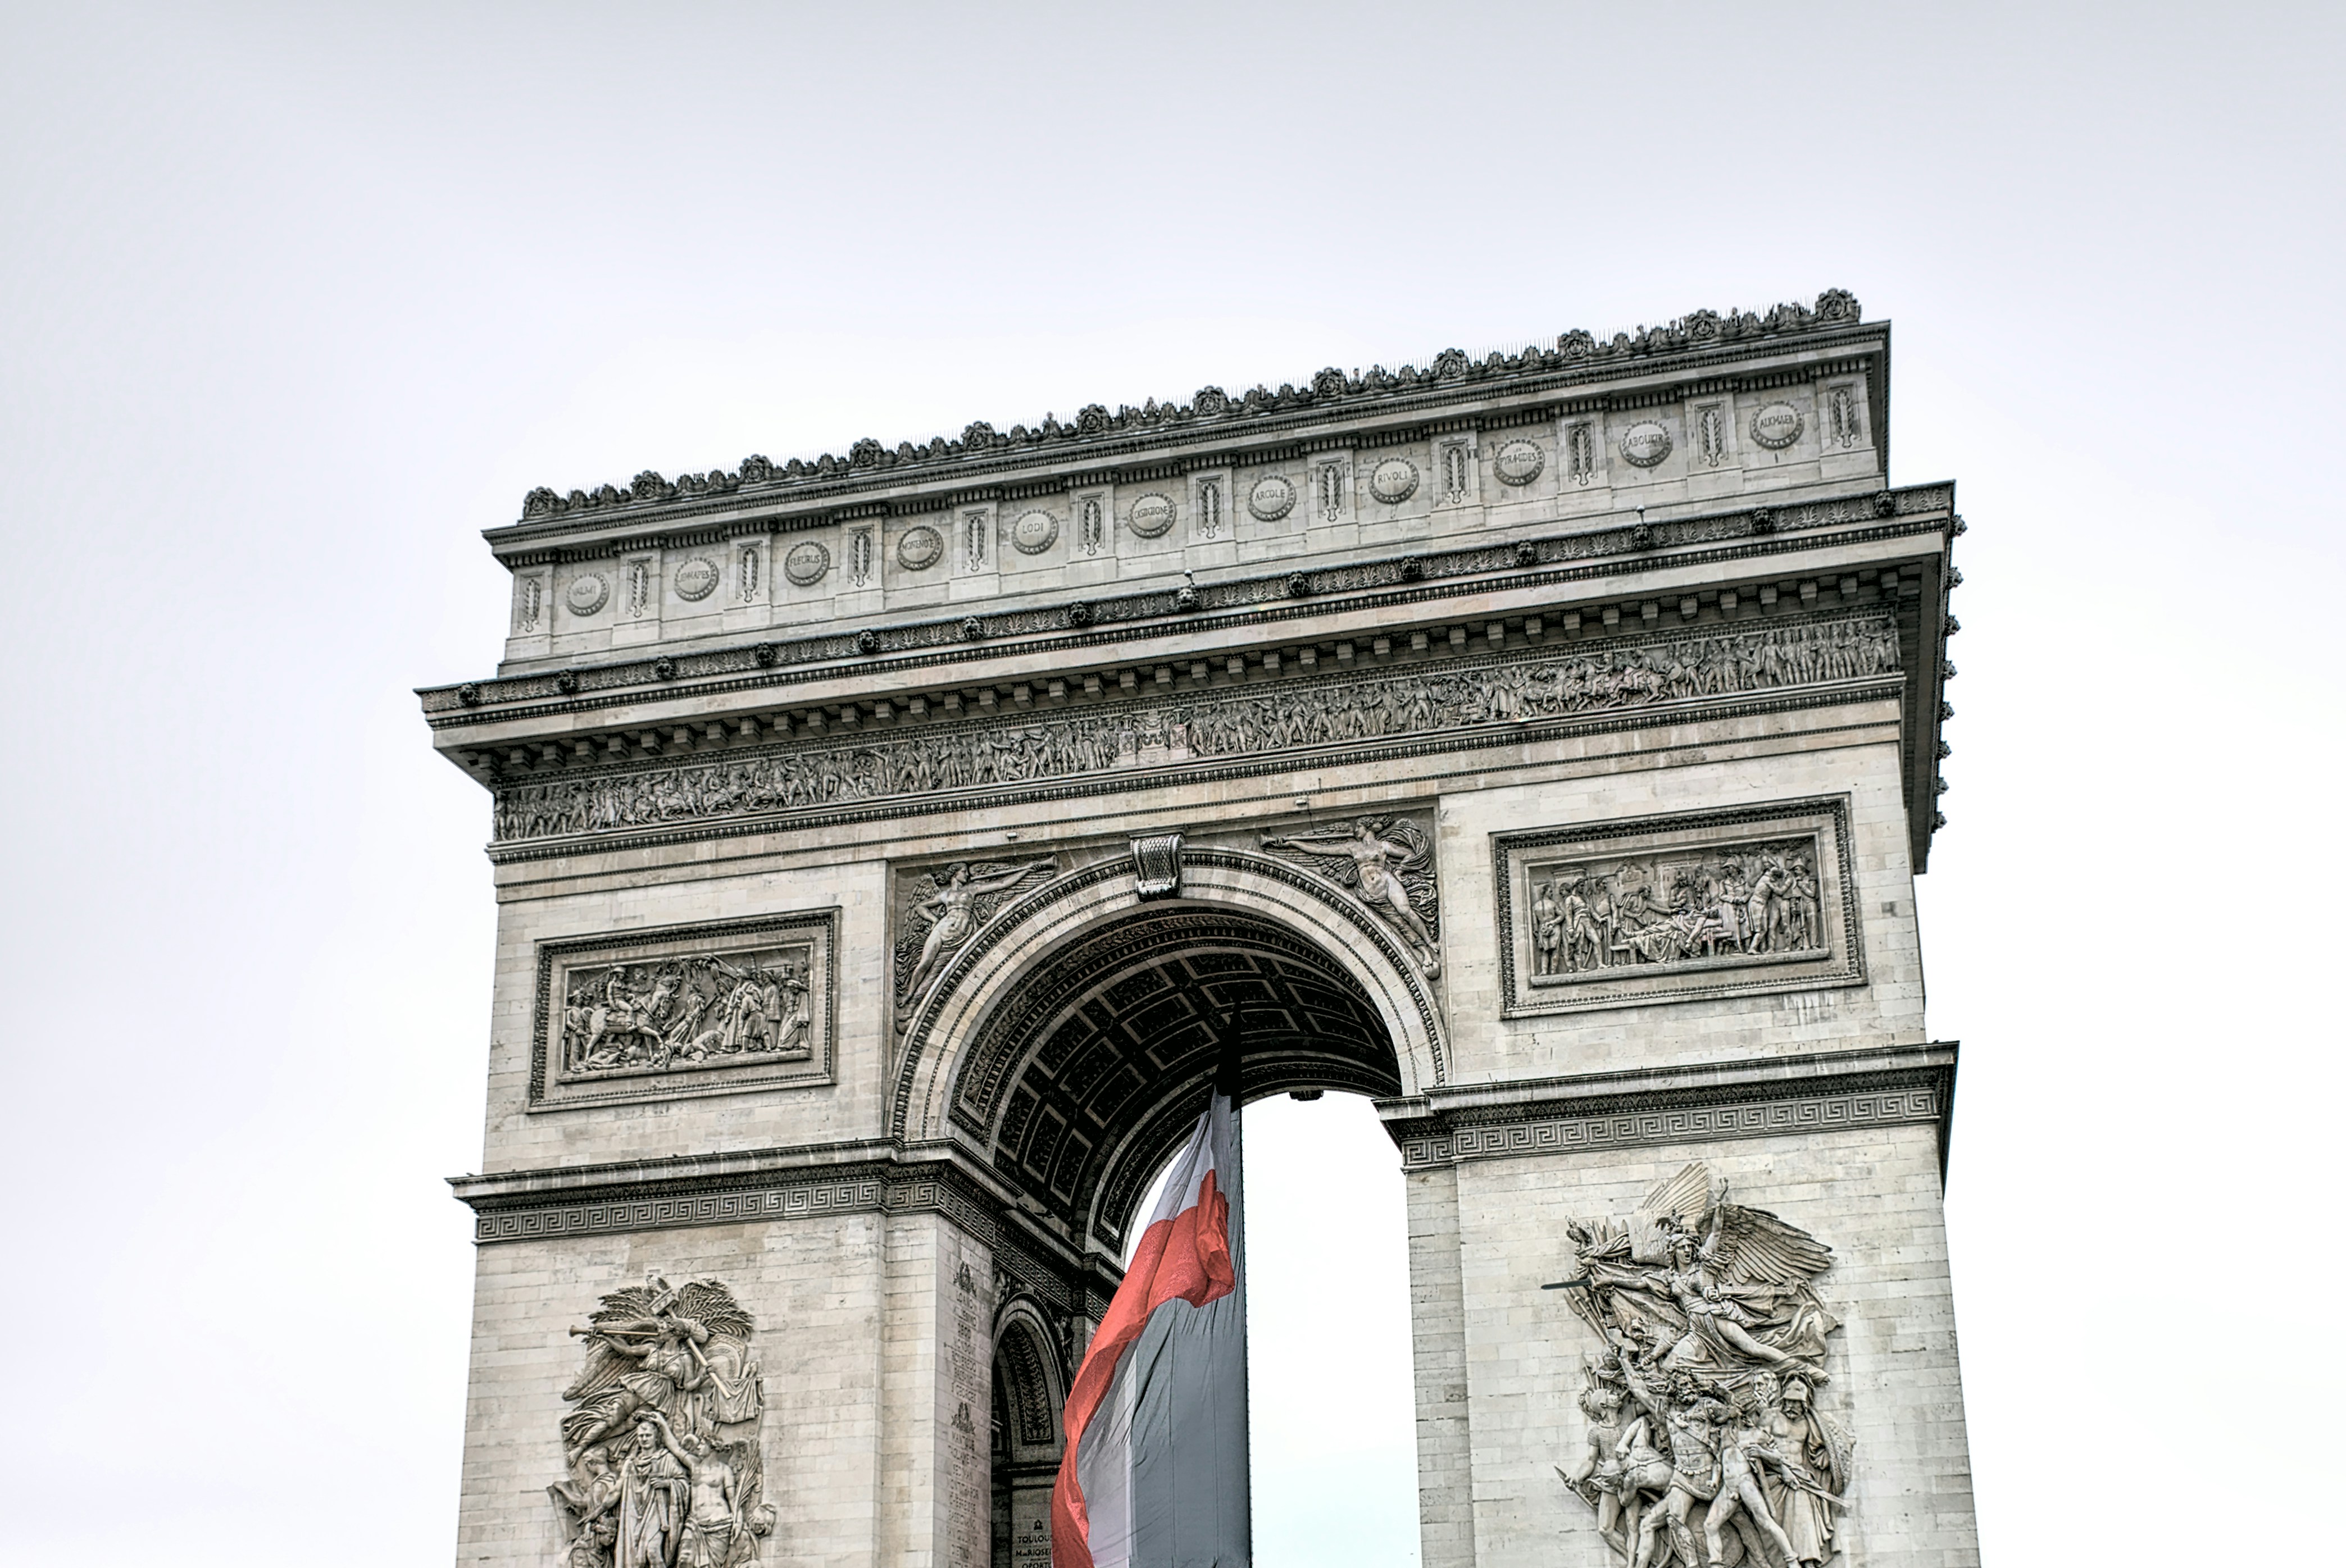 This is an old photograph that I took in 2016, at the time when Paris was flooded, the Siene was overflowing, and the sky was gray and boring. In this picture, however, I think the colours of the French flag contrasts nicely with the gray sky and somewhat plain Arc de Triomphe.